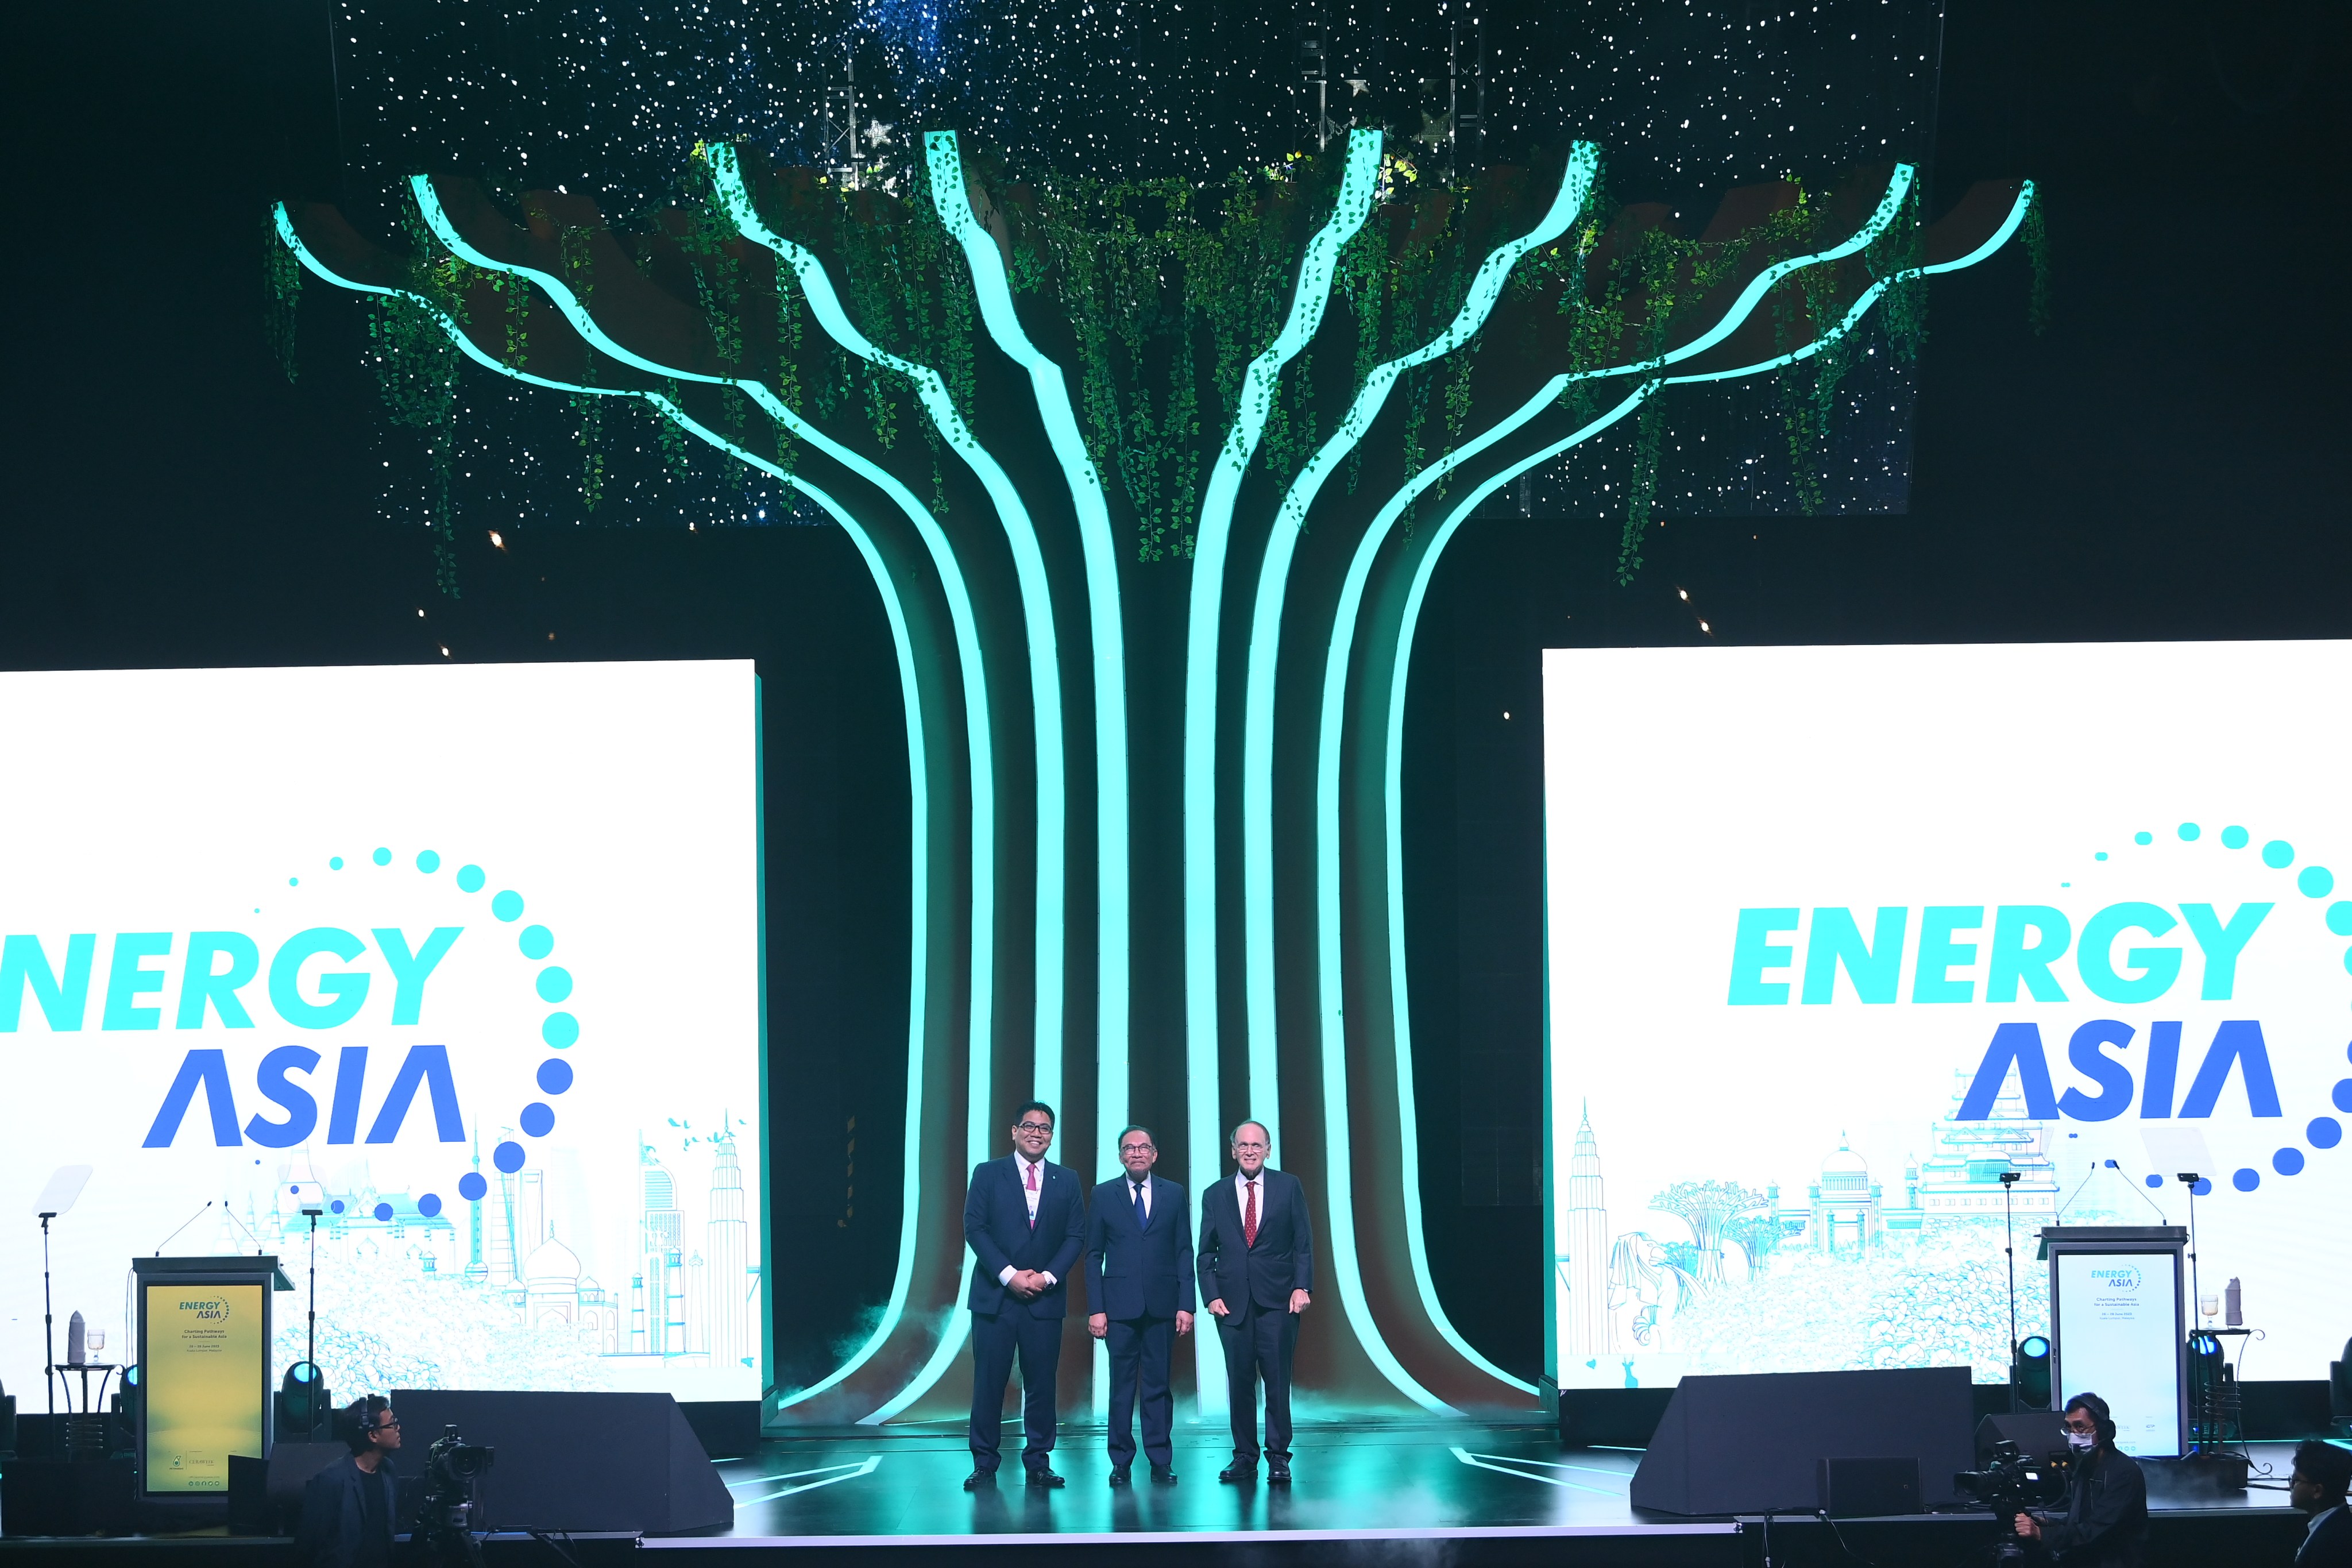 Appearing at the opening ceremony of the inaugural Energy Asia conference in Kuala Lumpur were (from left) Tengku Muhammad Taufik, president and group CEO of Petronas; Malaysian Prime Minister Anwar Ibrahim; and Dr Daniel Yergin, vice-chairman of S&P Global.